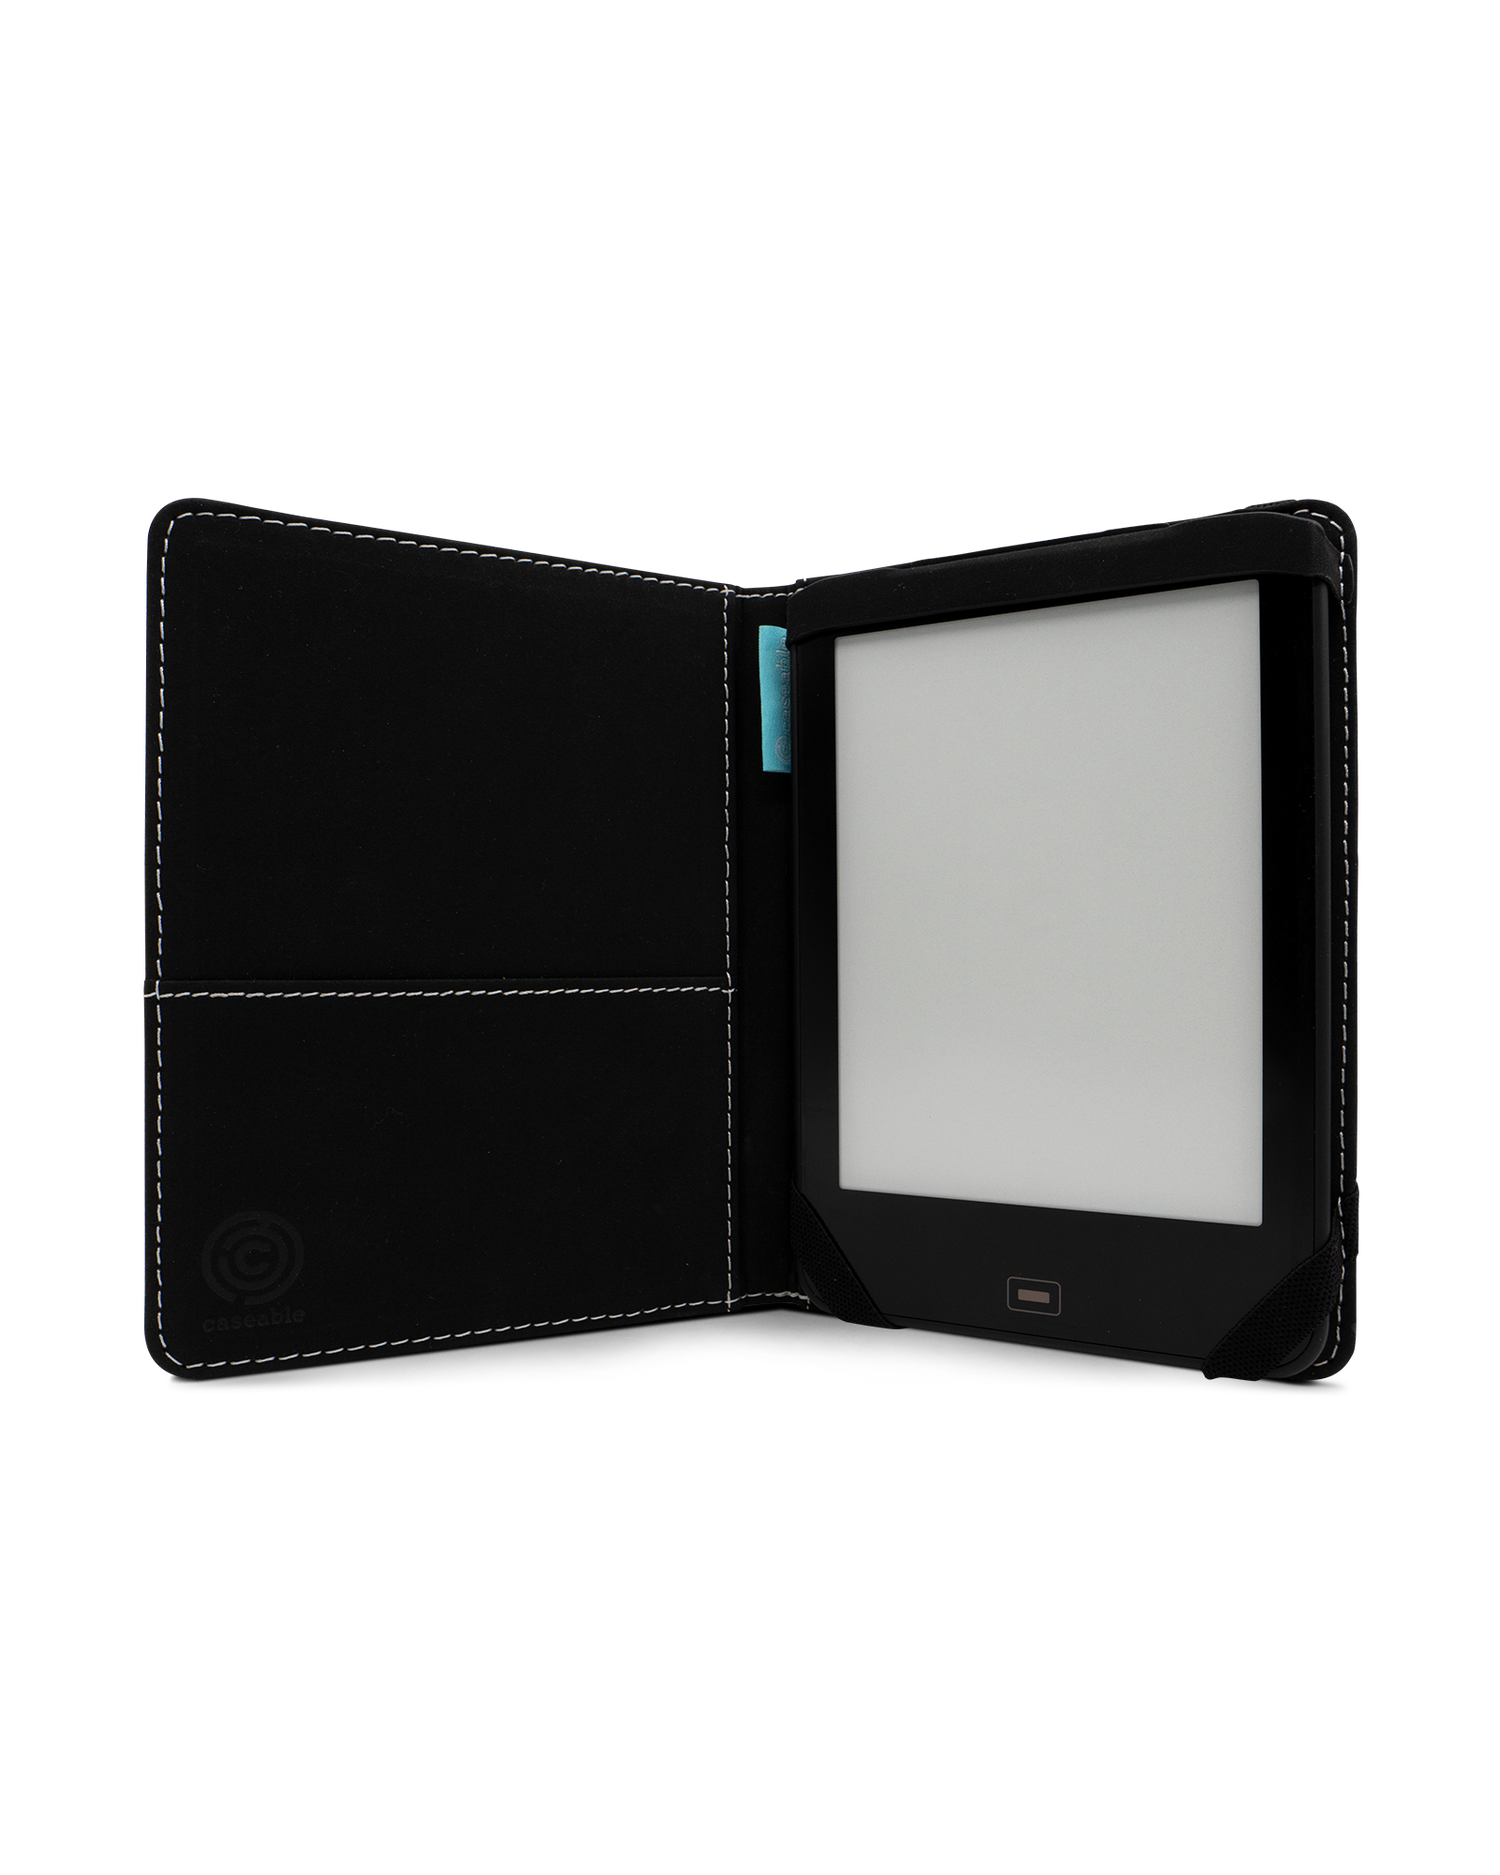 Wood eReader Case for tolino vision 1 to 4 HD: Opened interior view